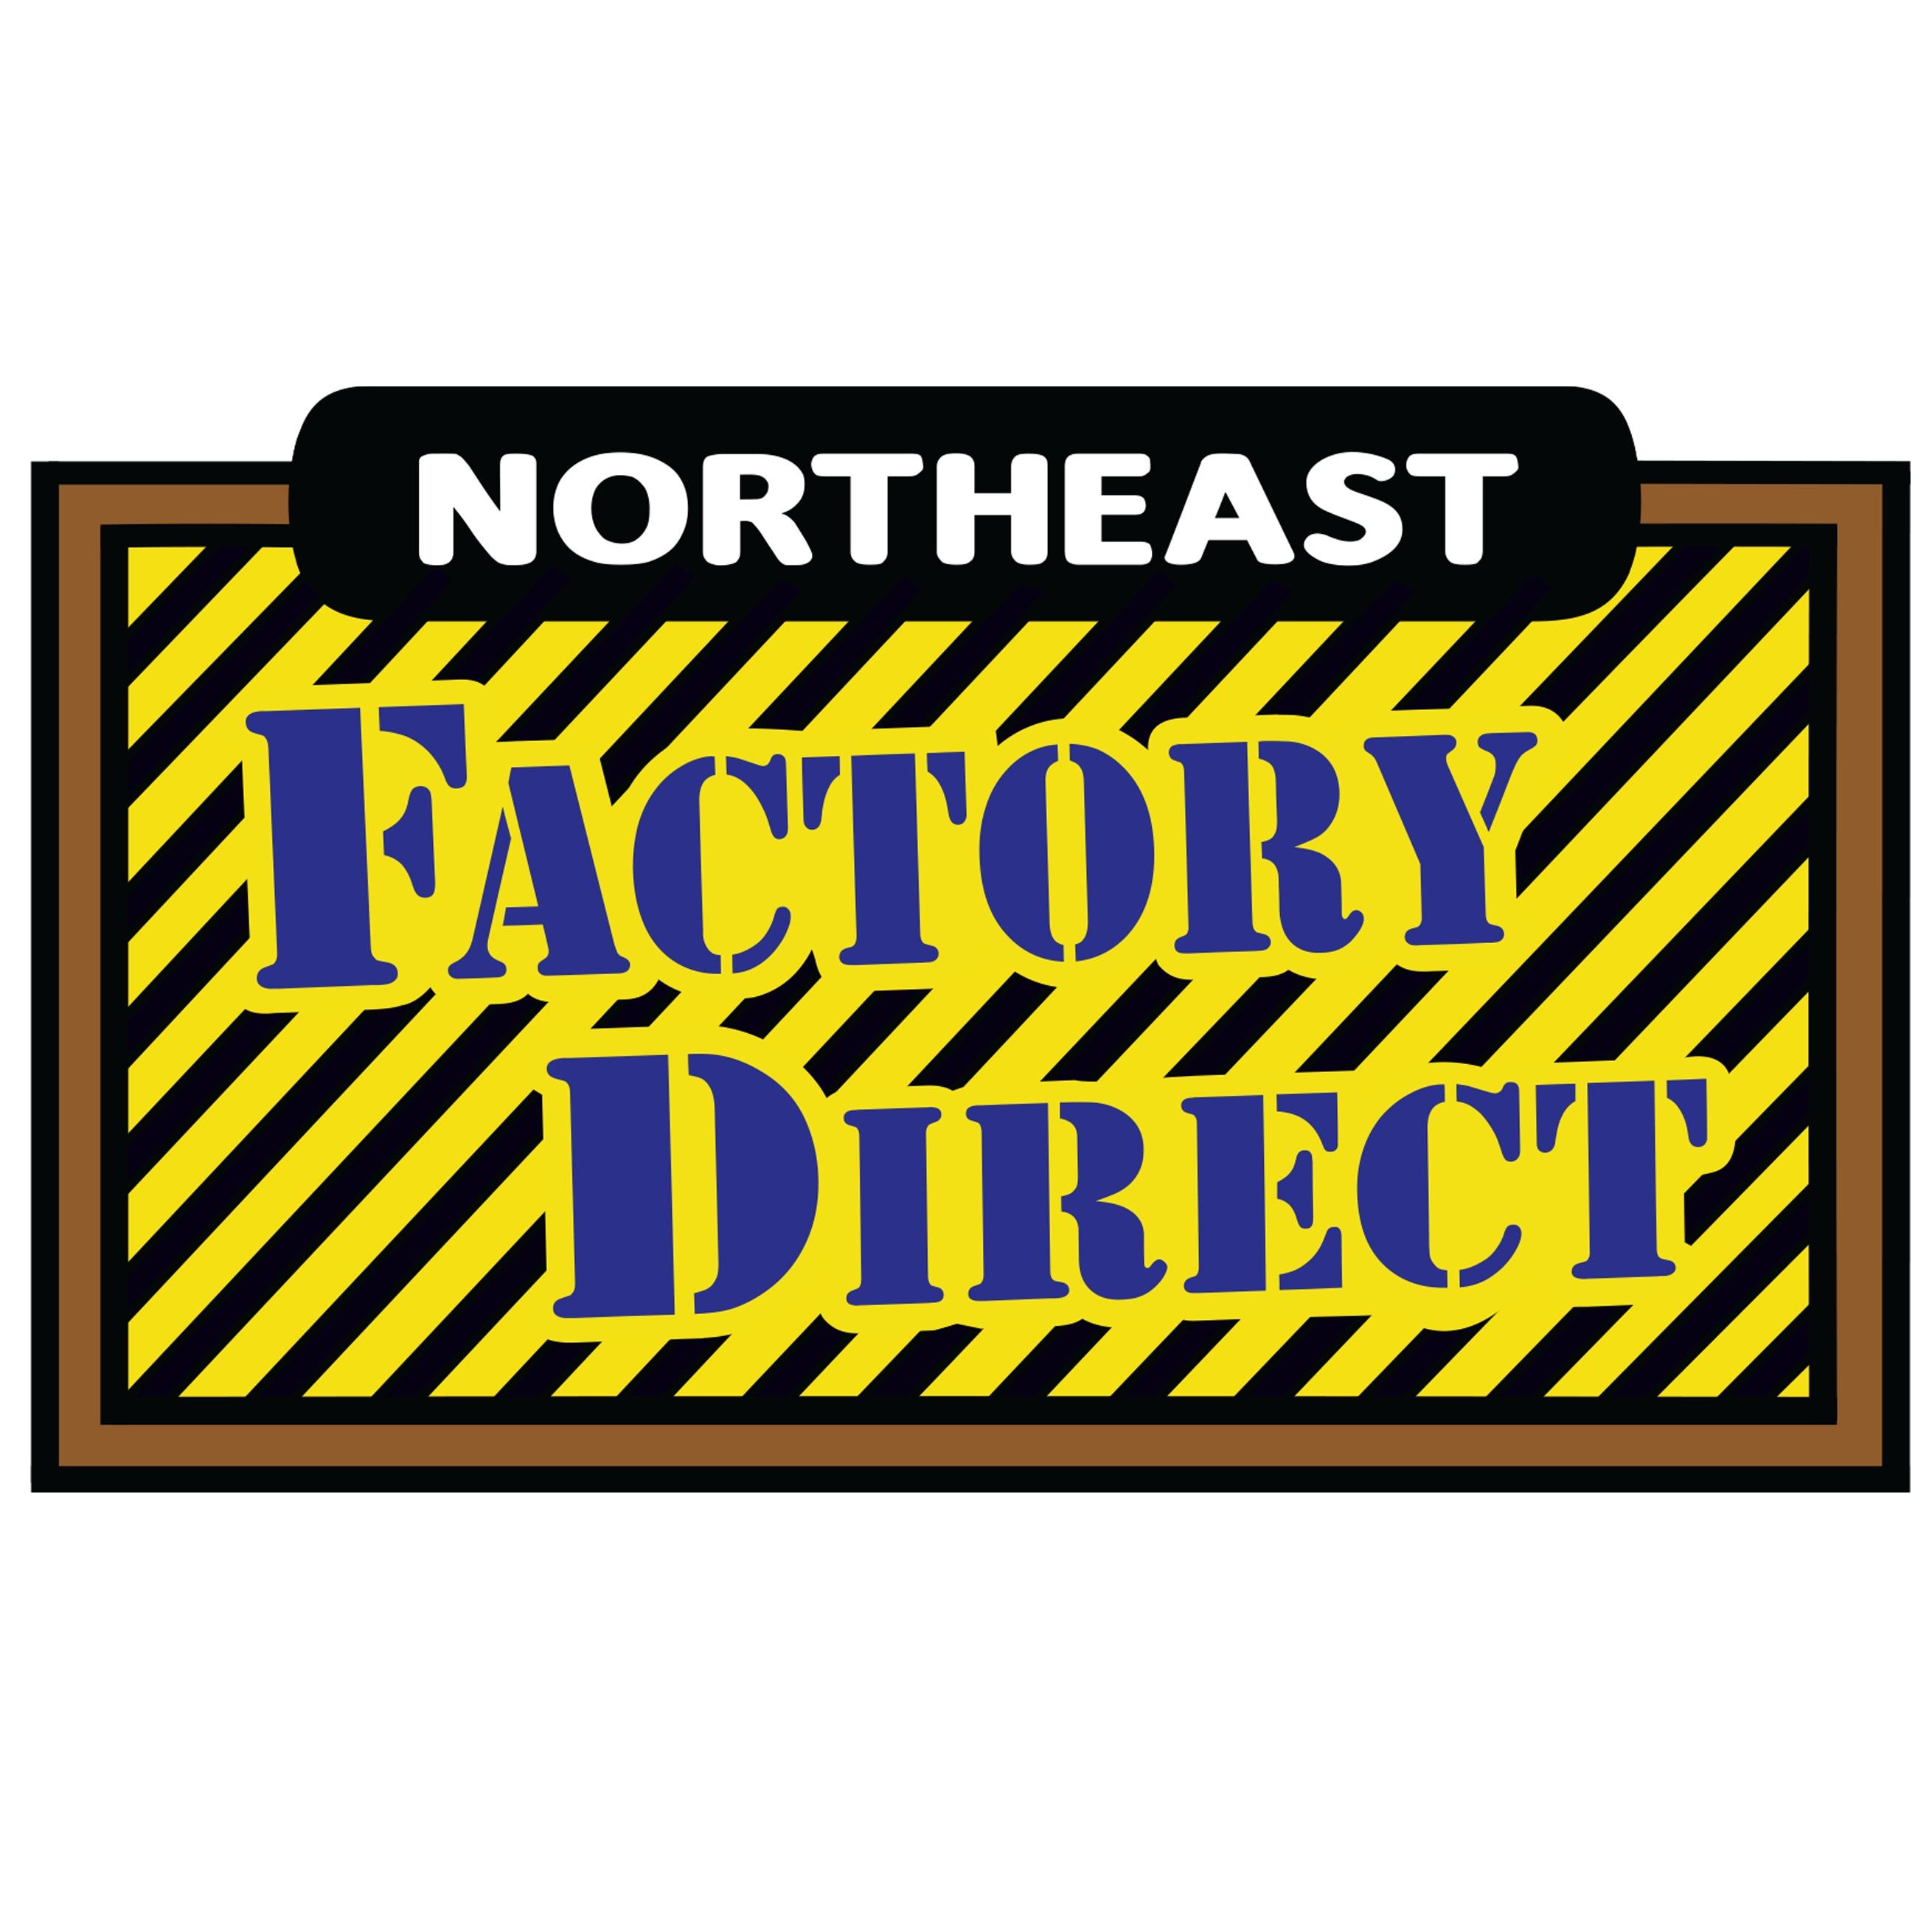 Northeast Factory Direct Photo